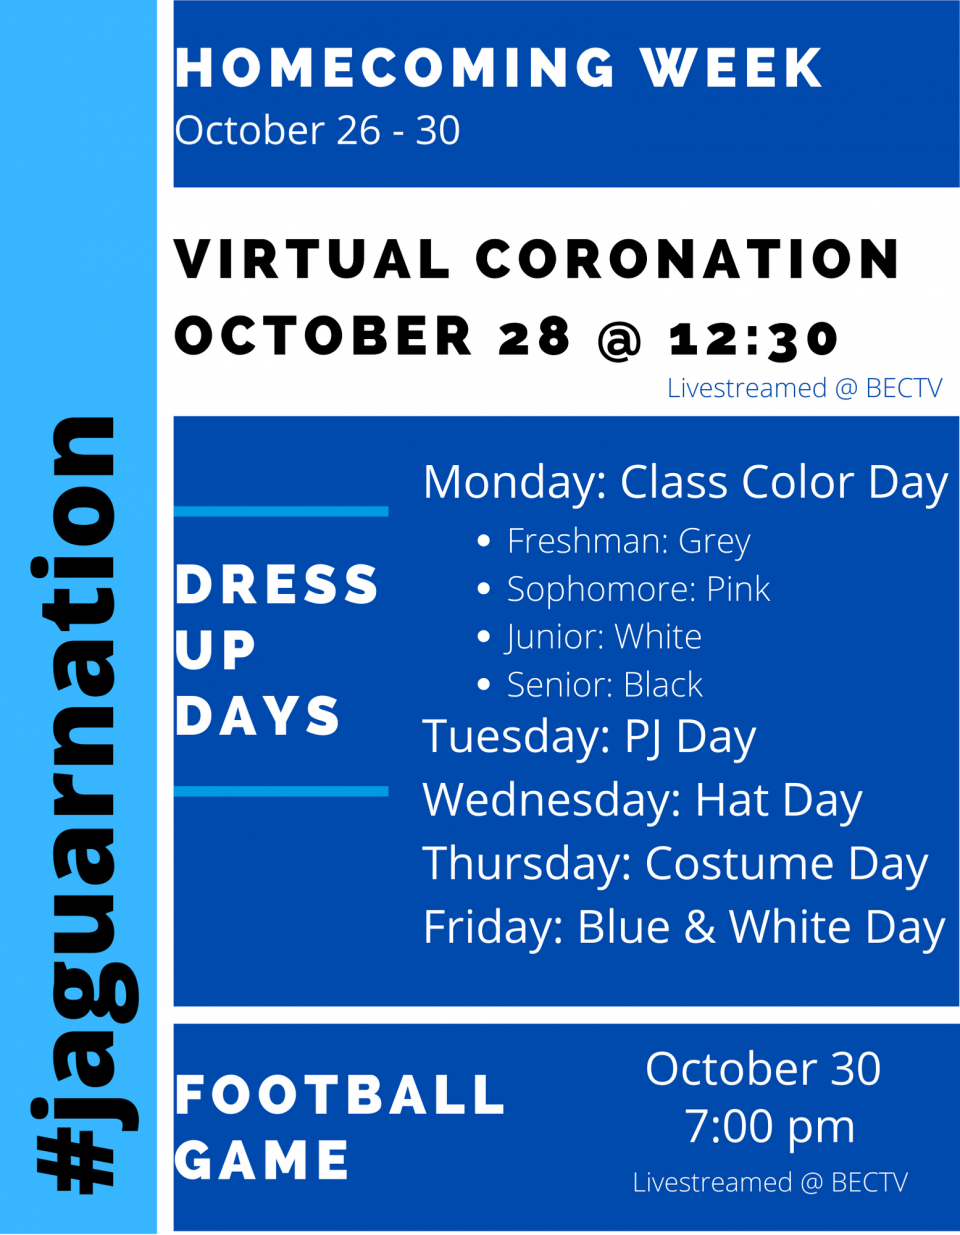 Homecoming week October 26-30; virtual coronation October 28 at 12:30; dress up days are Monday class color days, Tuesday PJ day, Wednesday Hat day, Thursday Costume day, Friday blue and white day; football gam is October 30 at 7 p.m.